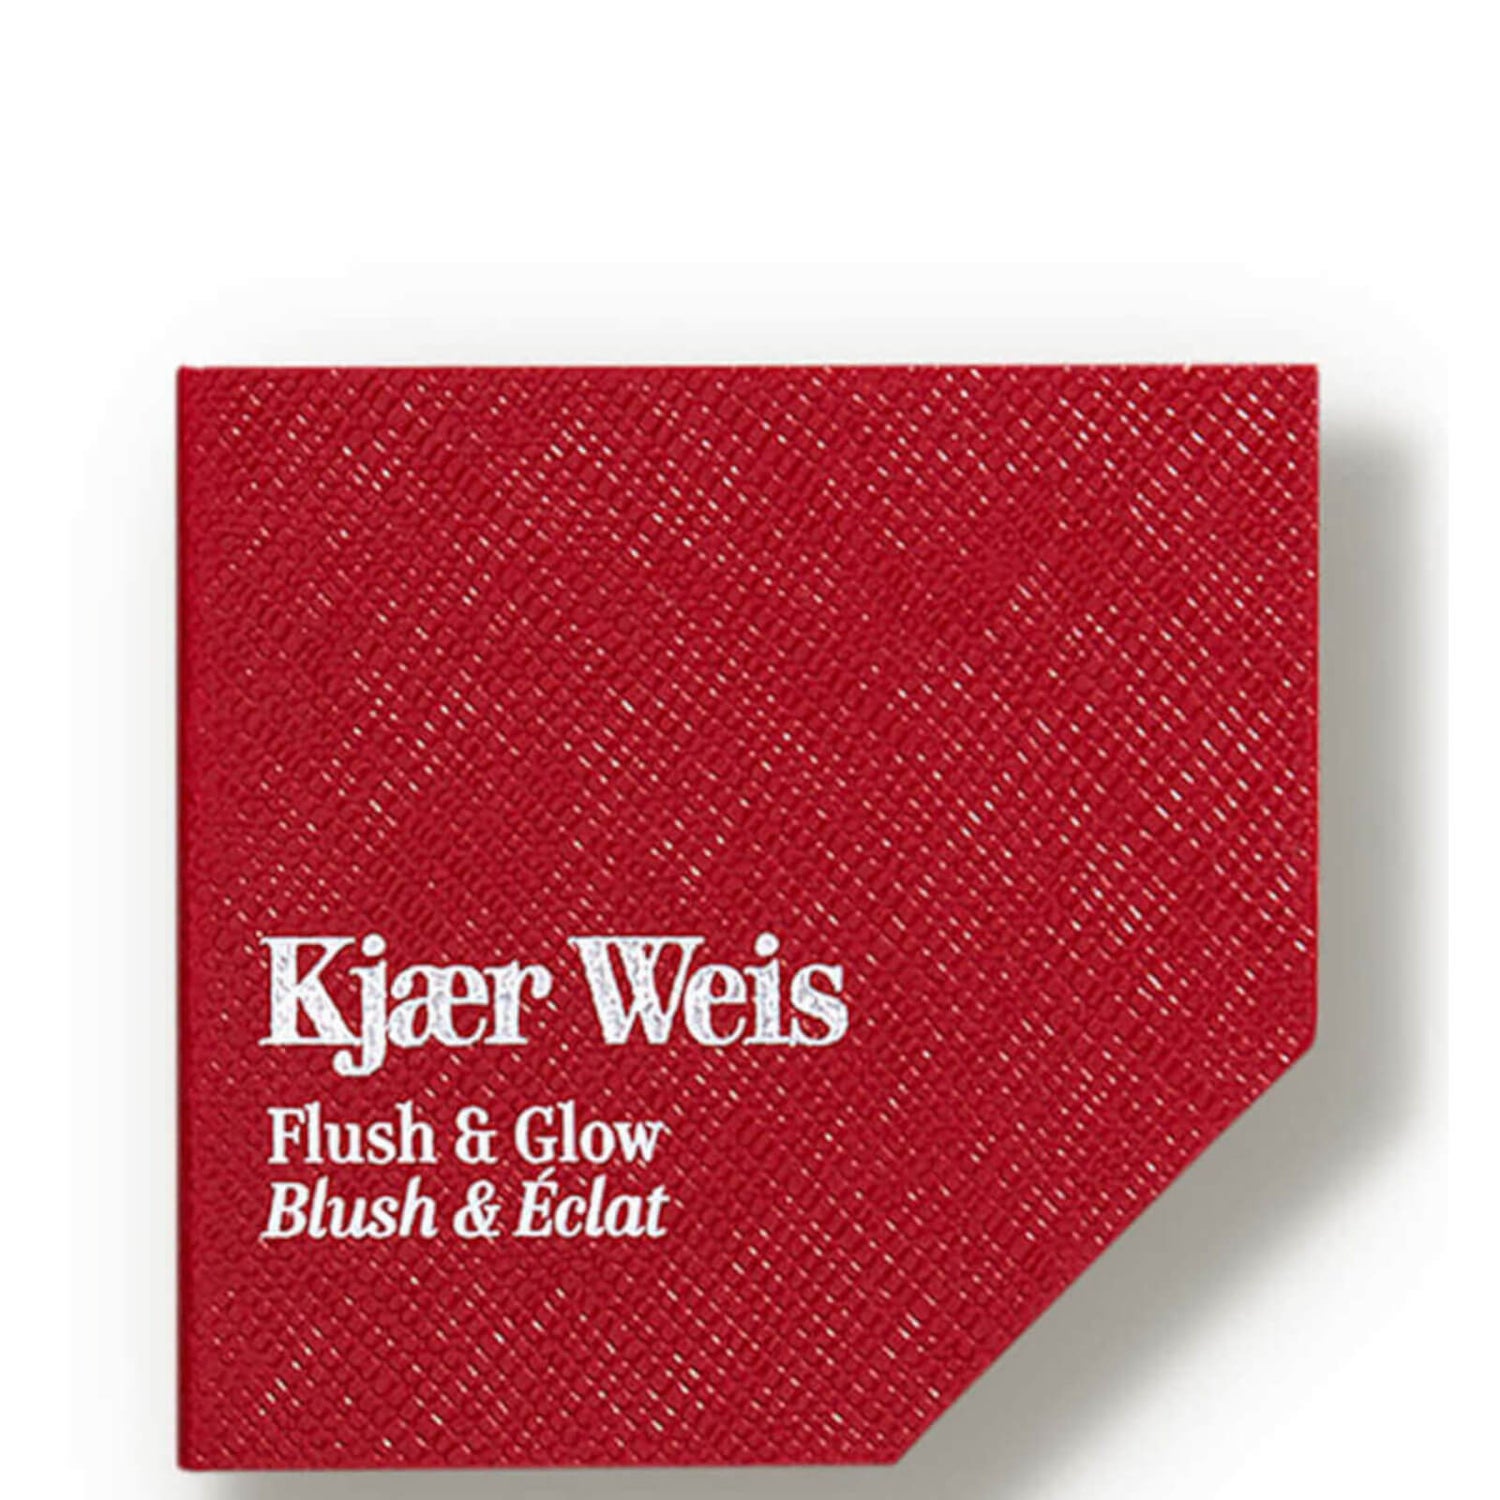 Kjaer Weis Red Edition Compact - Flush Glow (1 piece)